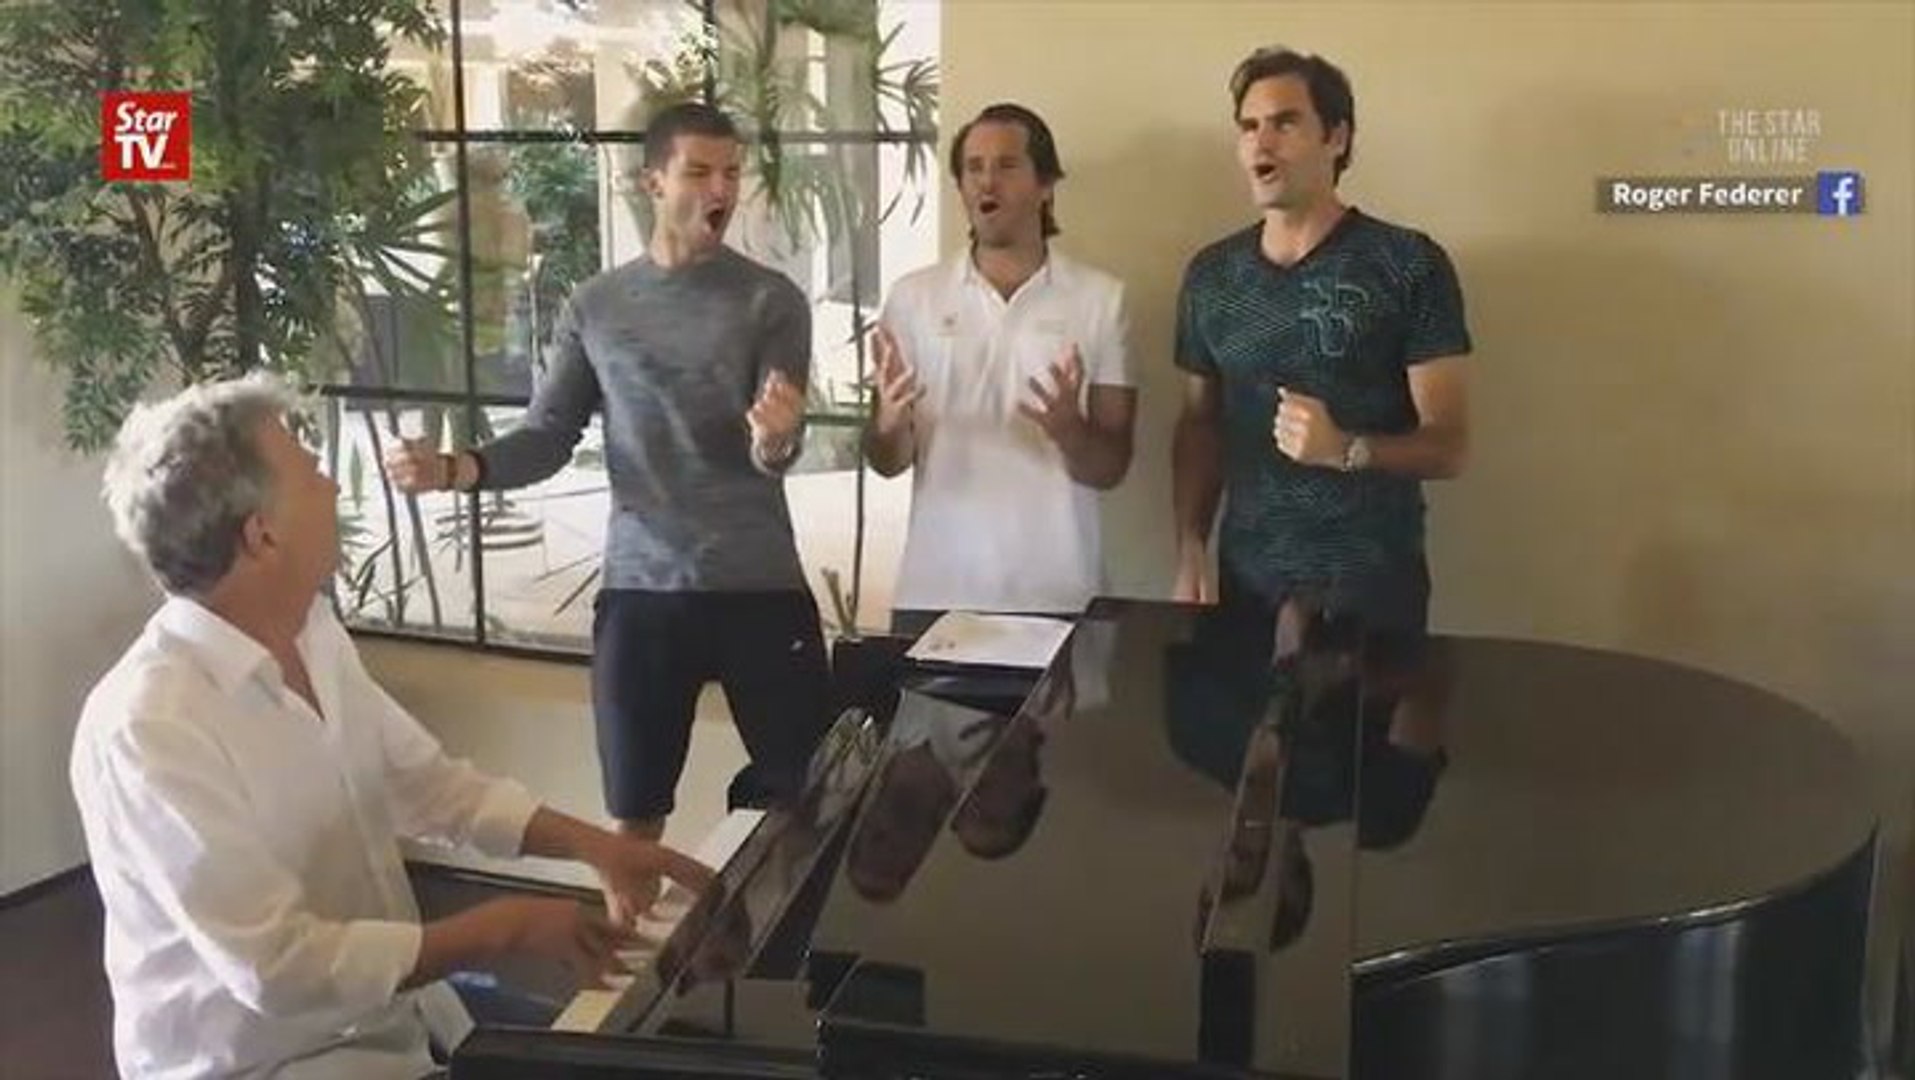 Roger Federer, David Foster and the “Backhand Boys” go viral - video  Dailymotion